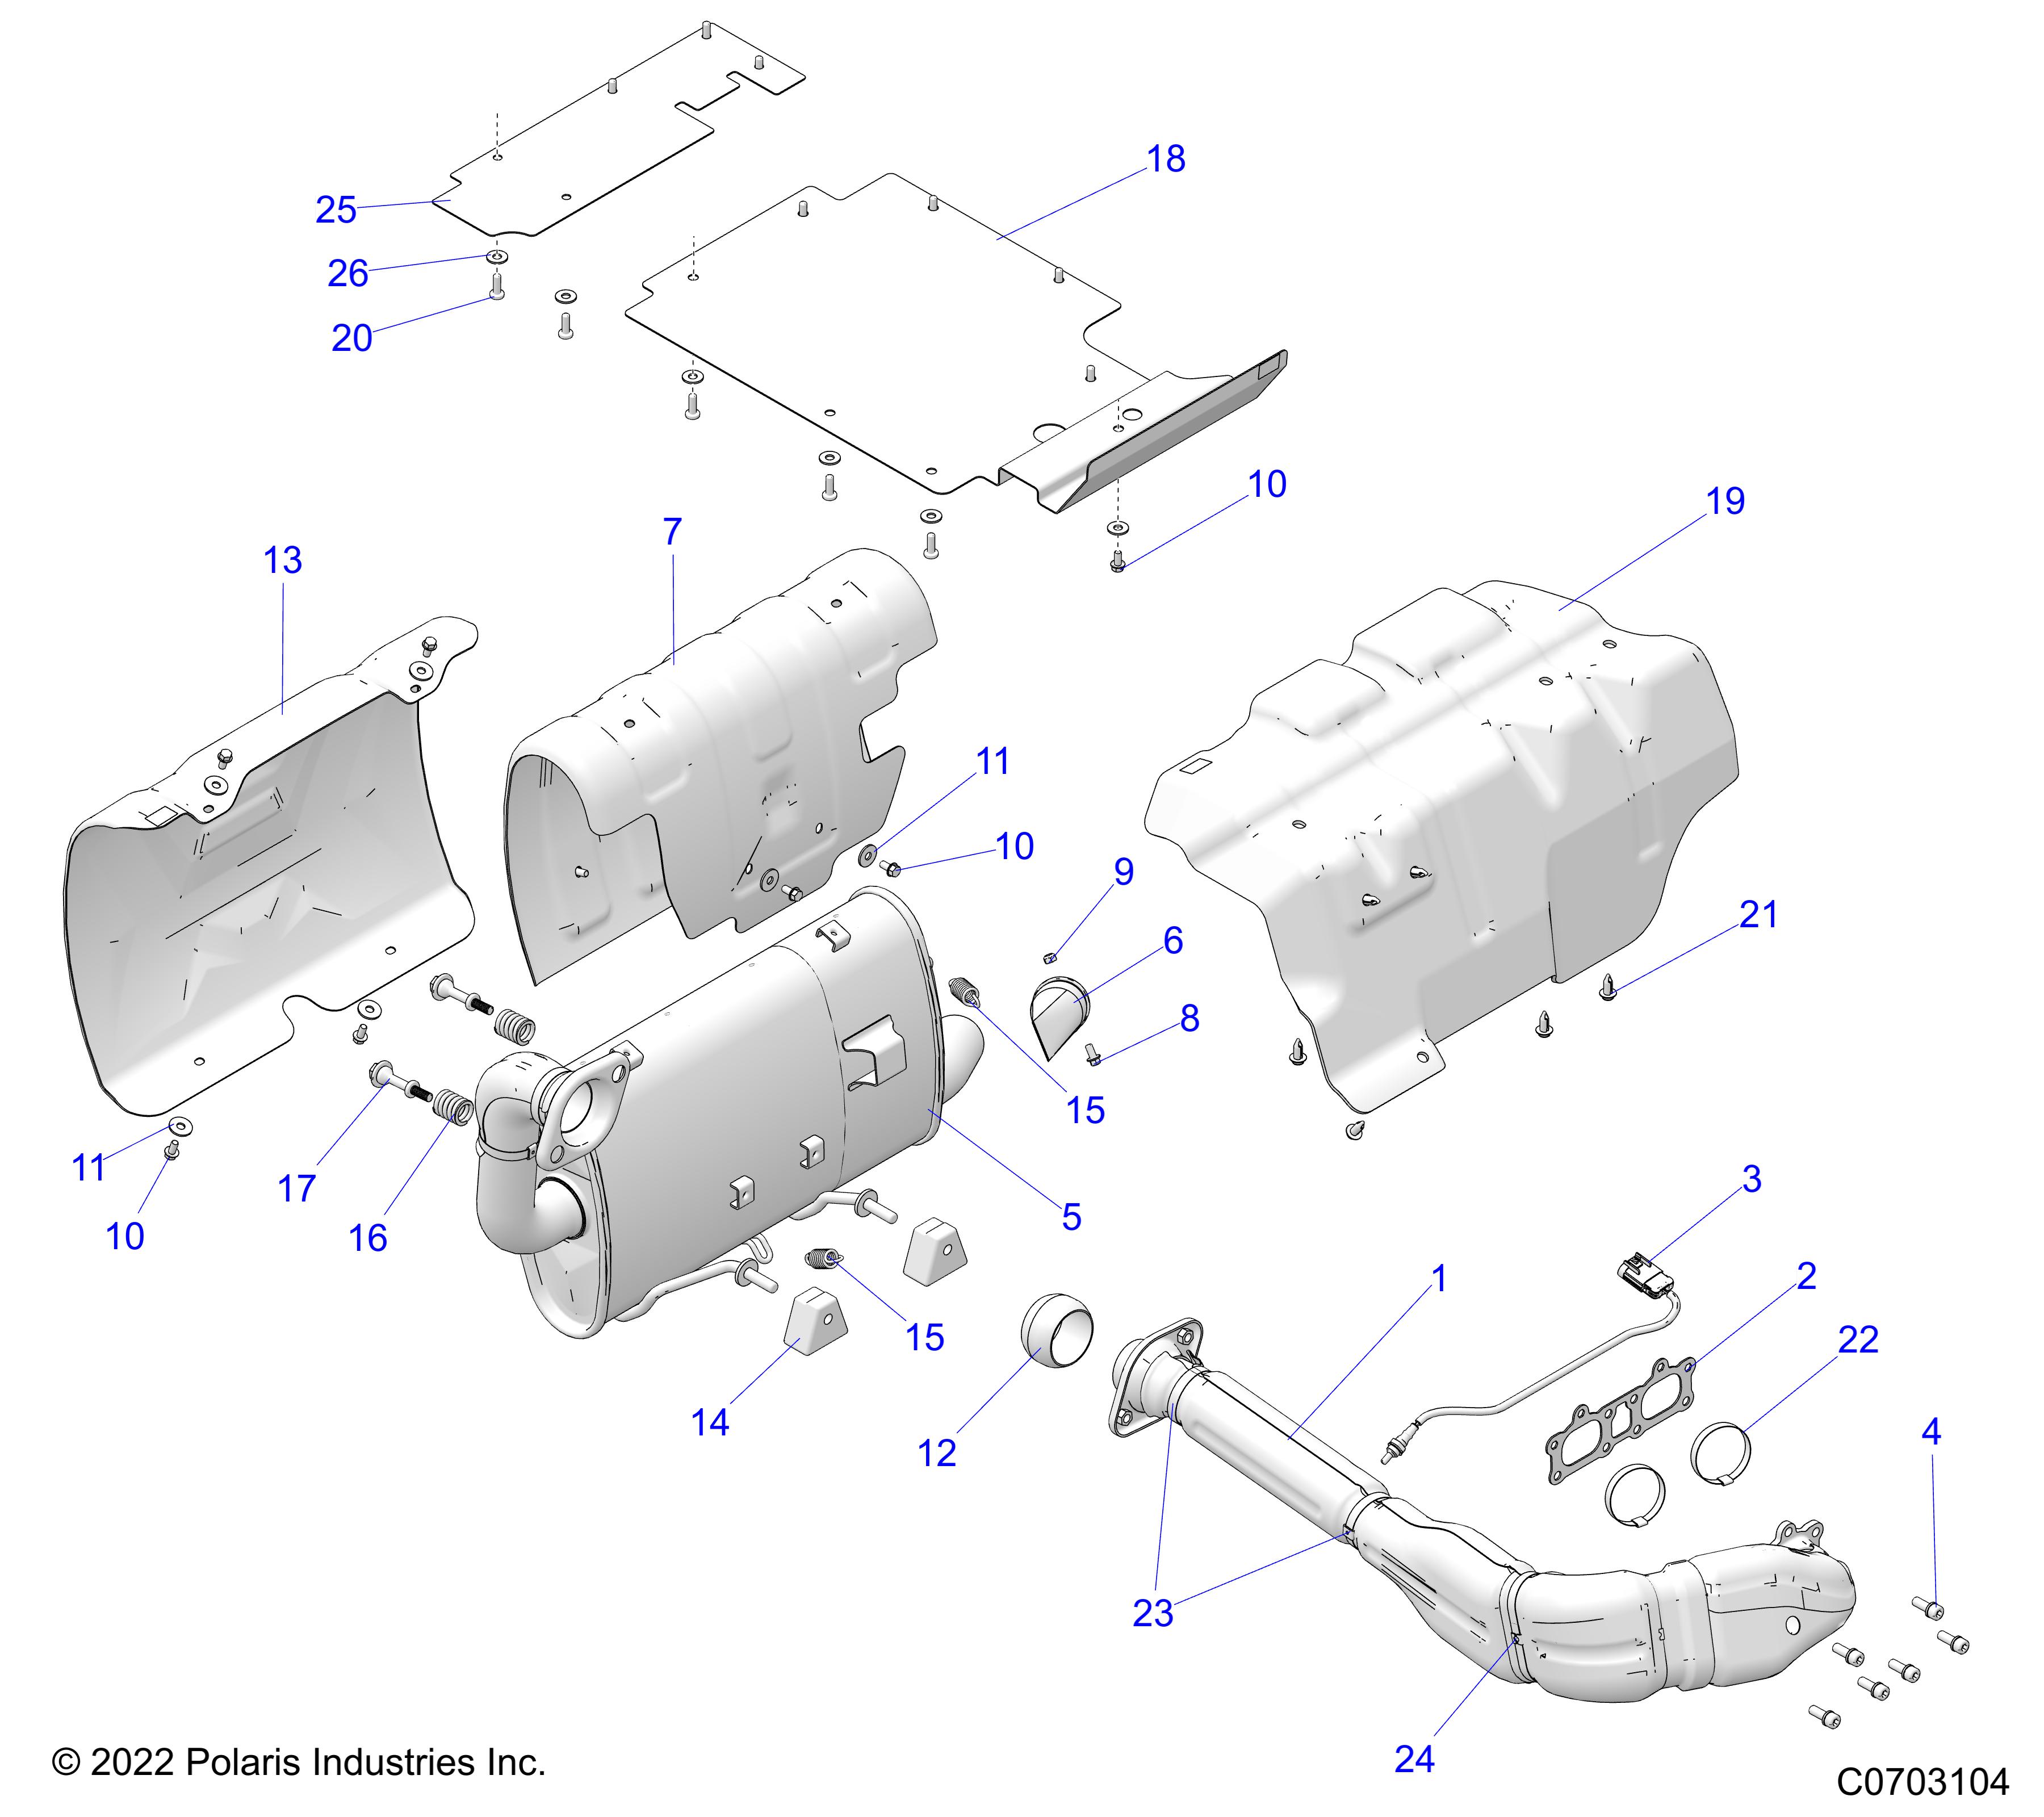 Part Number : 5263934 SHIELD-BOX REAR